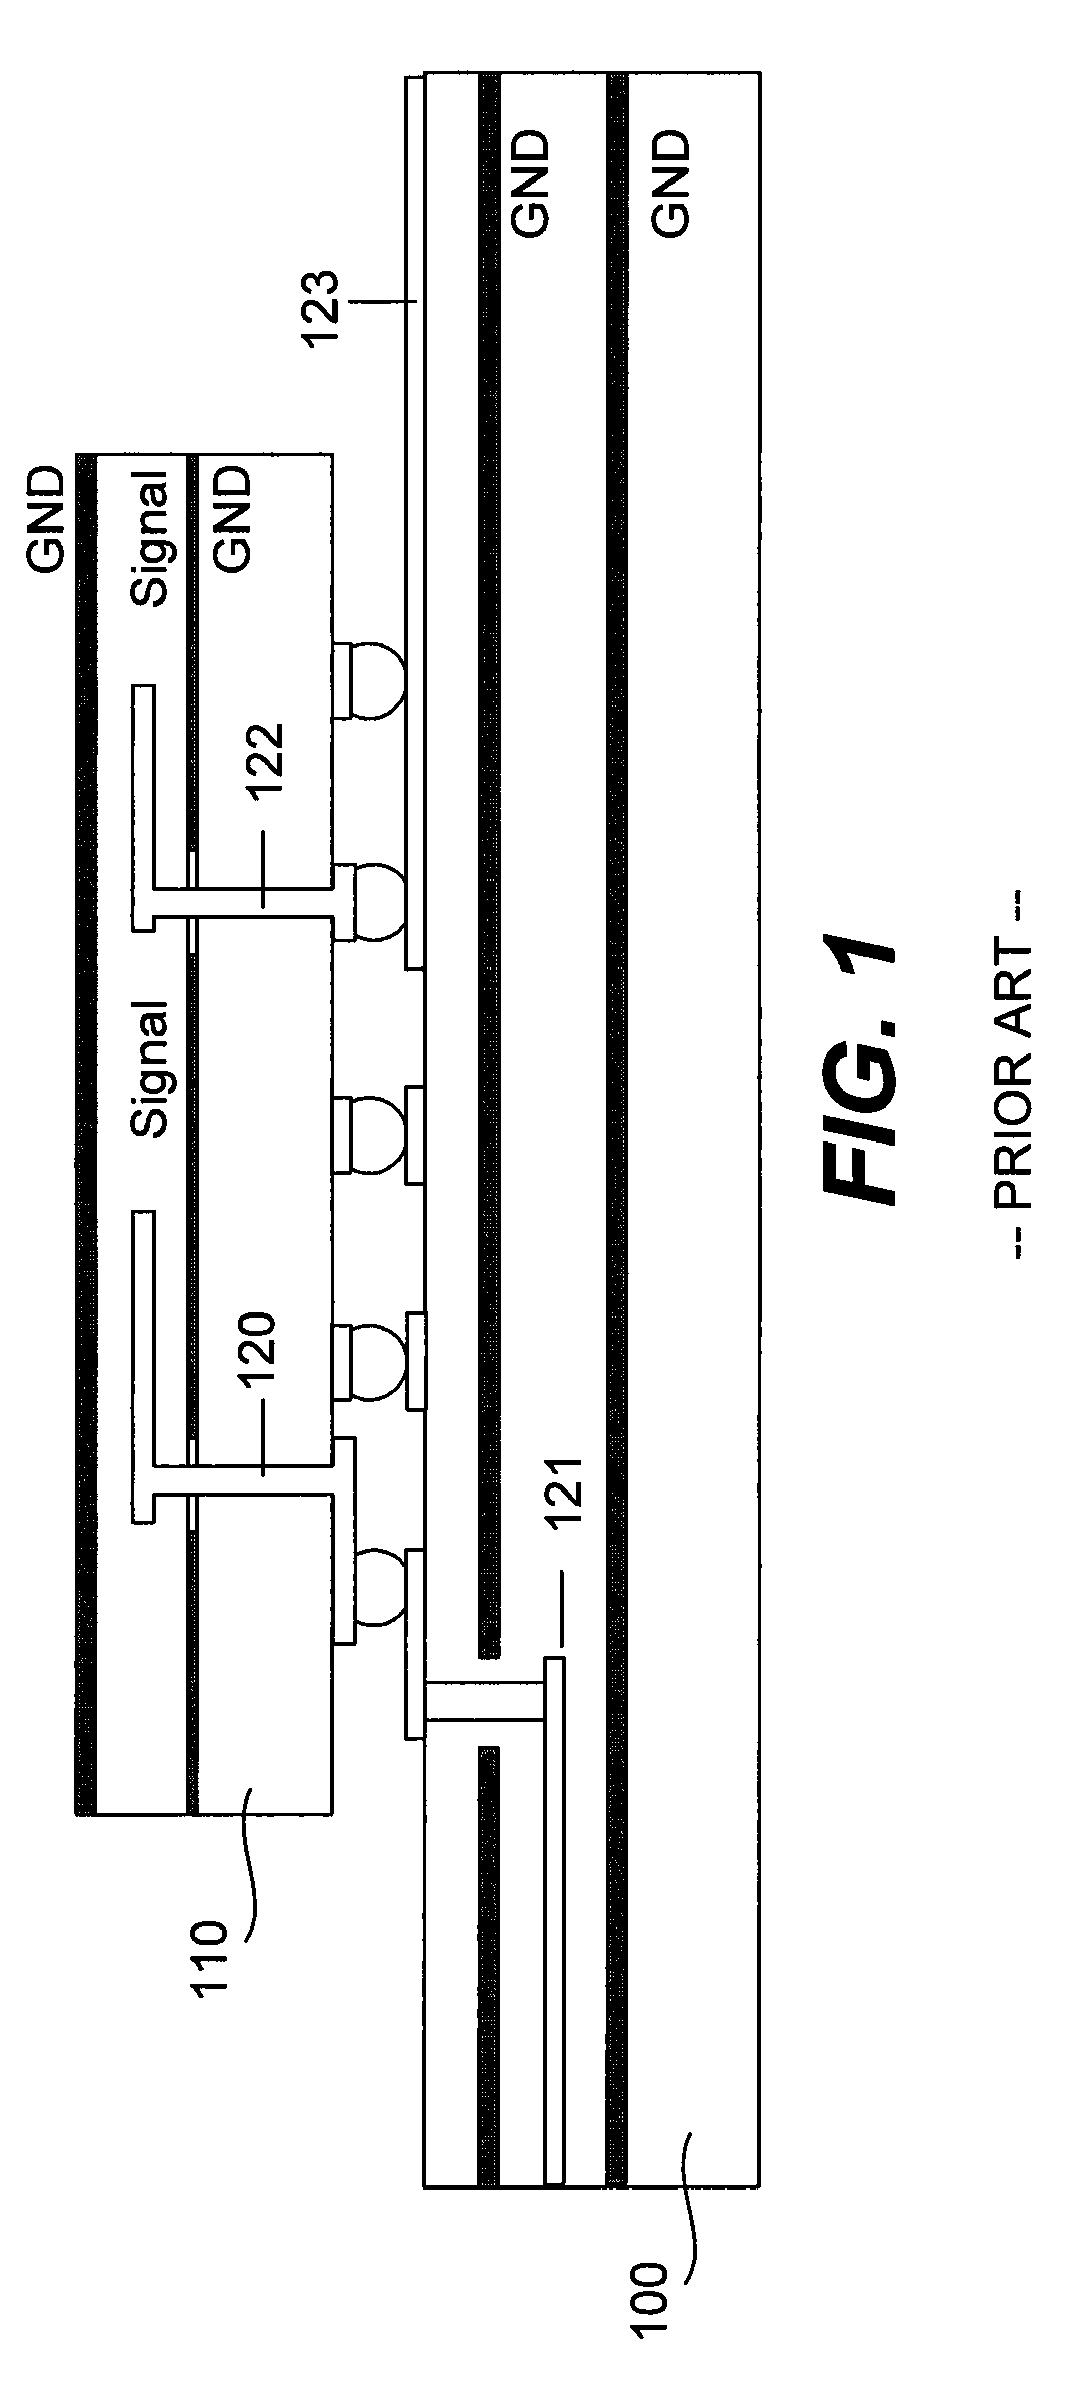 Ball grid array package-to-board interconnect co-design apparatus